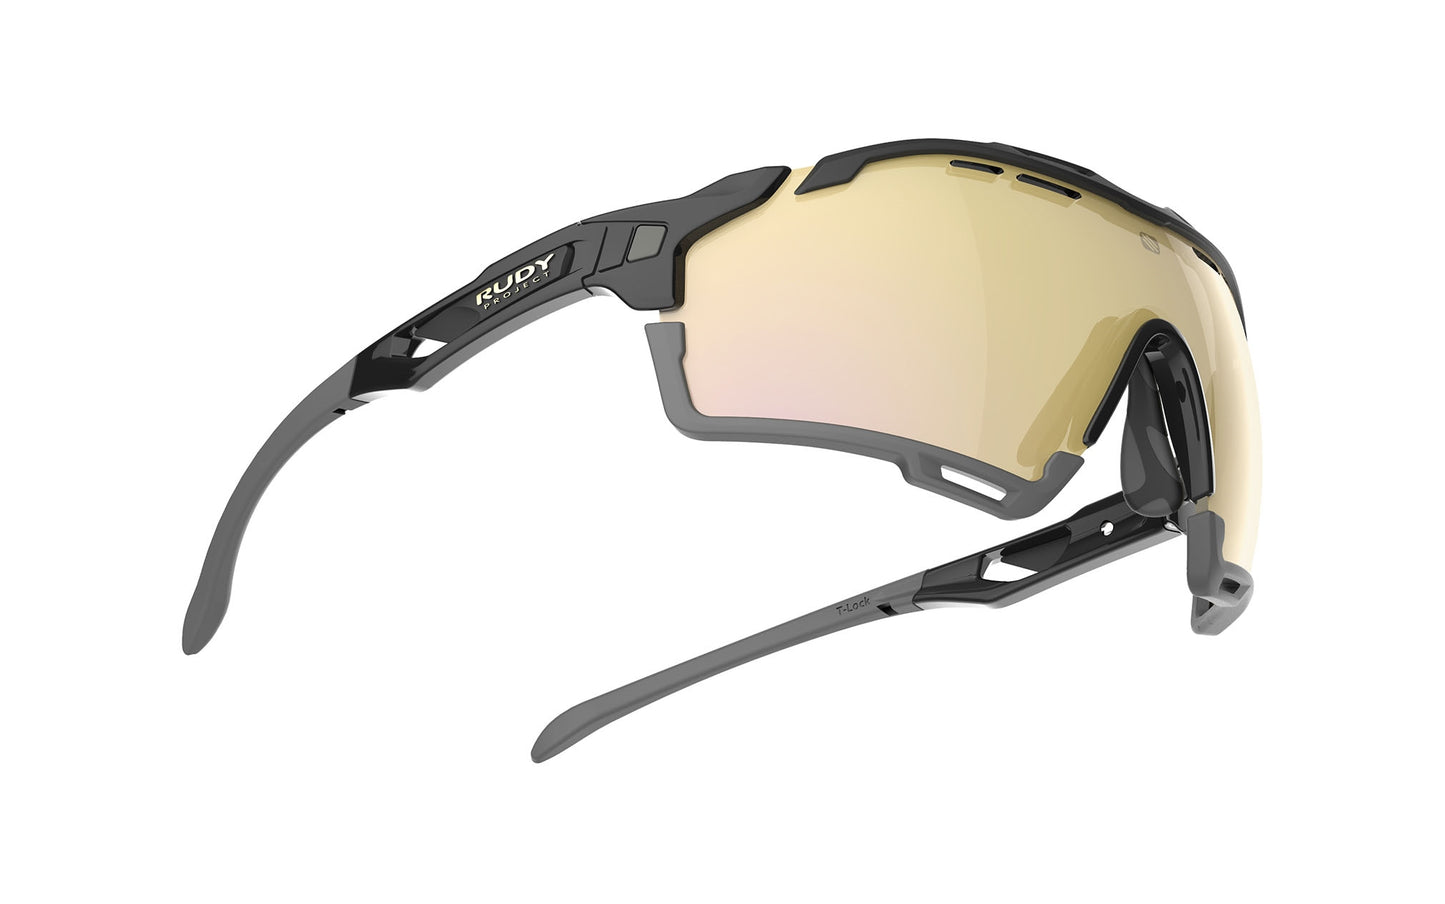 Load image into Gallery viewer, Rudy Project Cutline Black Gloss - Rp Optics Multilaser Gold Sunglasses
